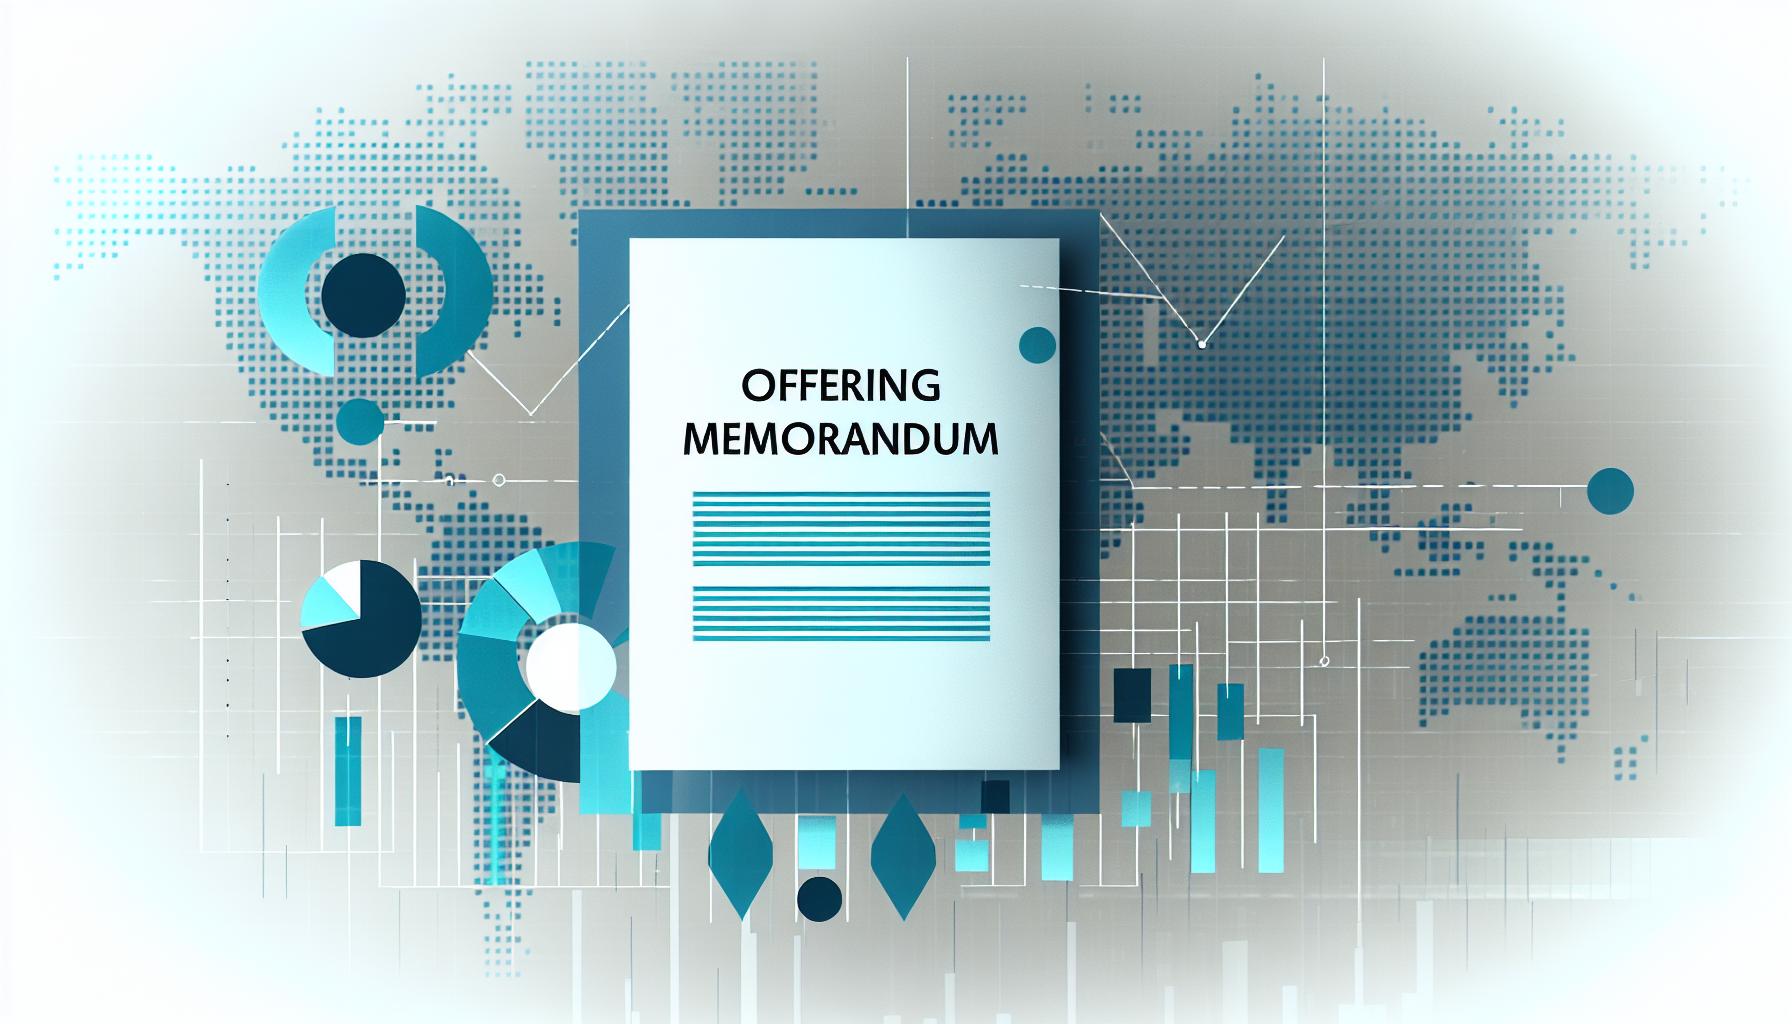 a picture for a blog post that shows some graphic and or words to describe An Offering Memorandum for ma